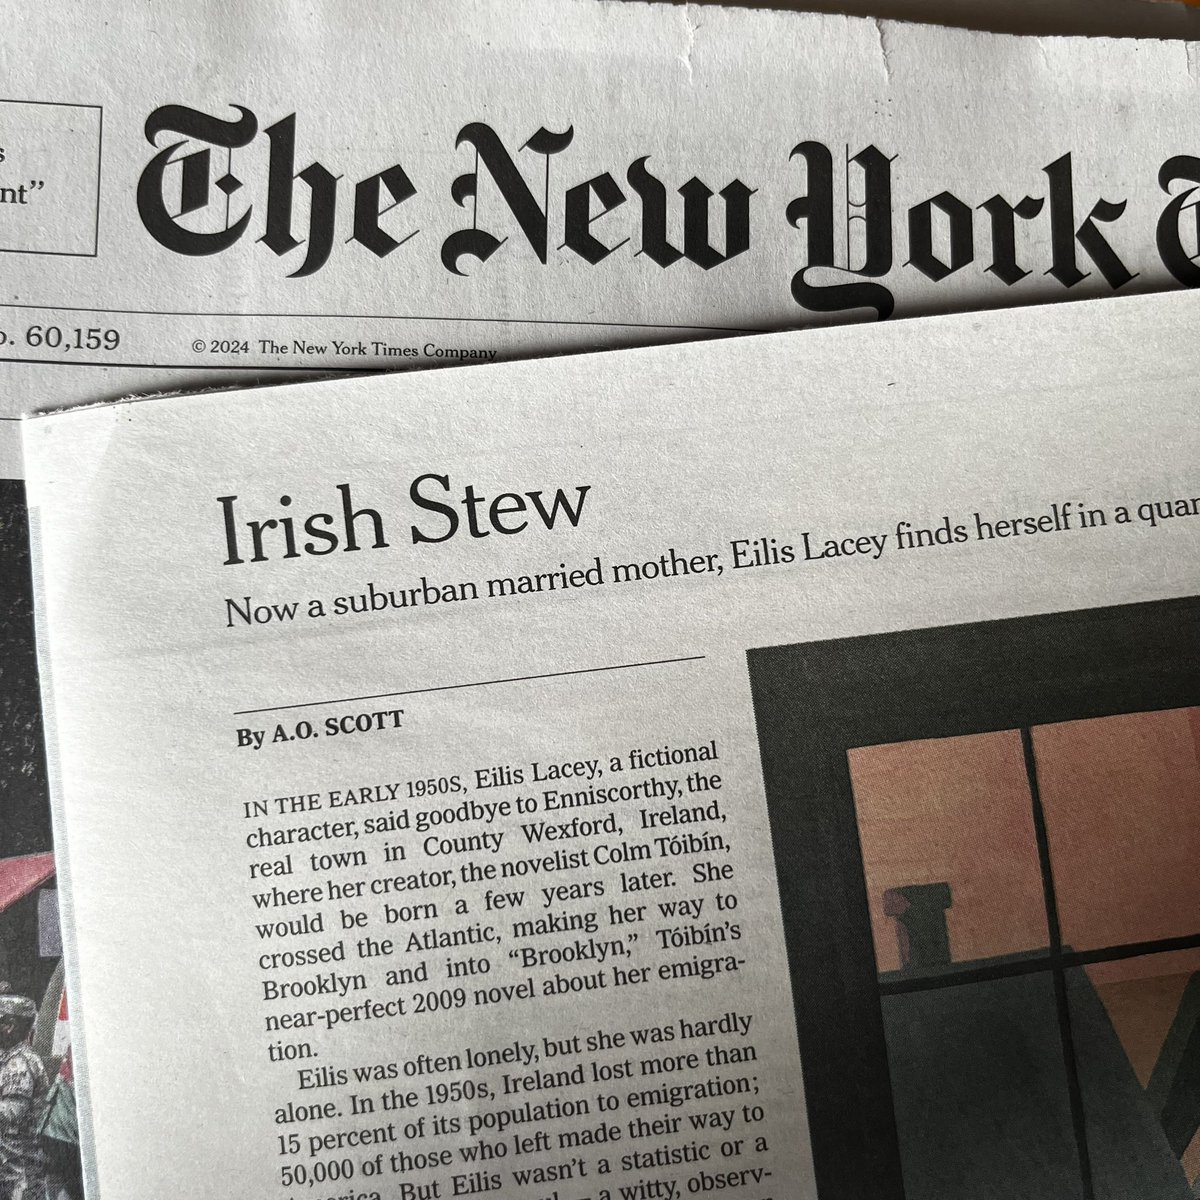 Irish Stew in the @nytimes!? Oh wait, it’s a review of #ColmTóibín’s new novel “Long Island.” Oh well, we’re enjoying our brush with greatness☘️ Please return the title when you’re done using it.